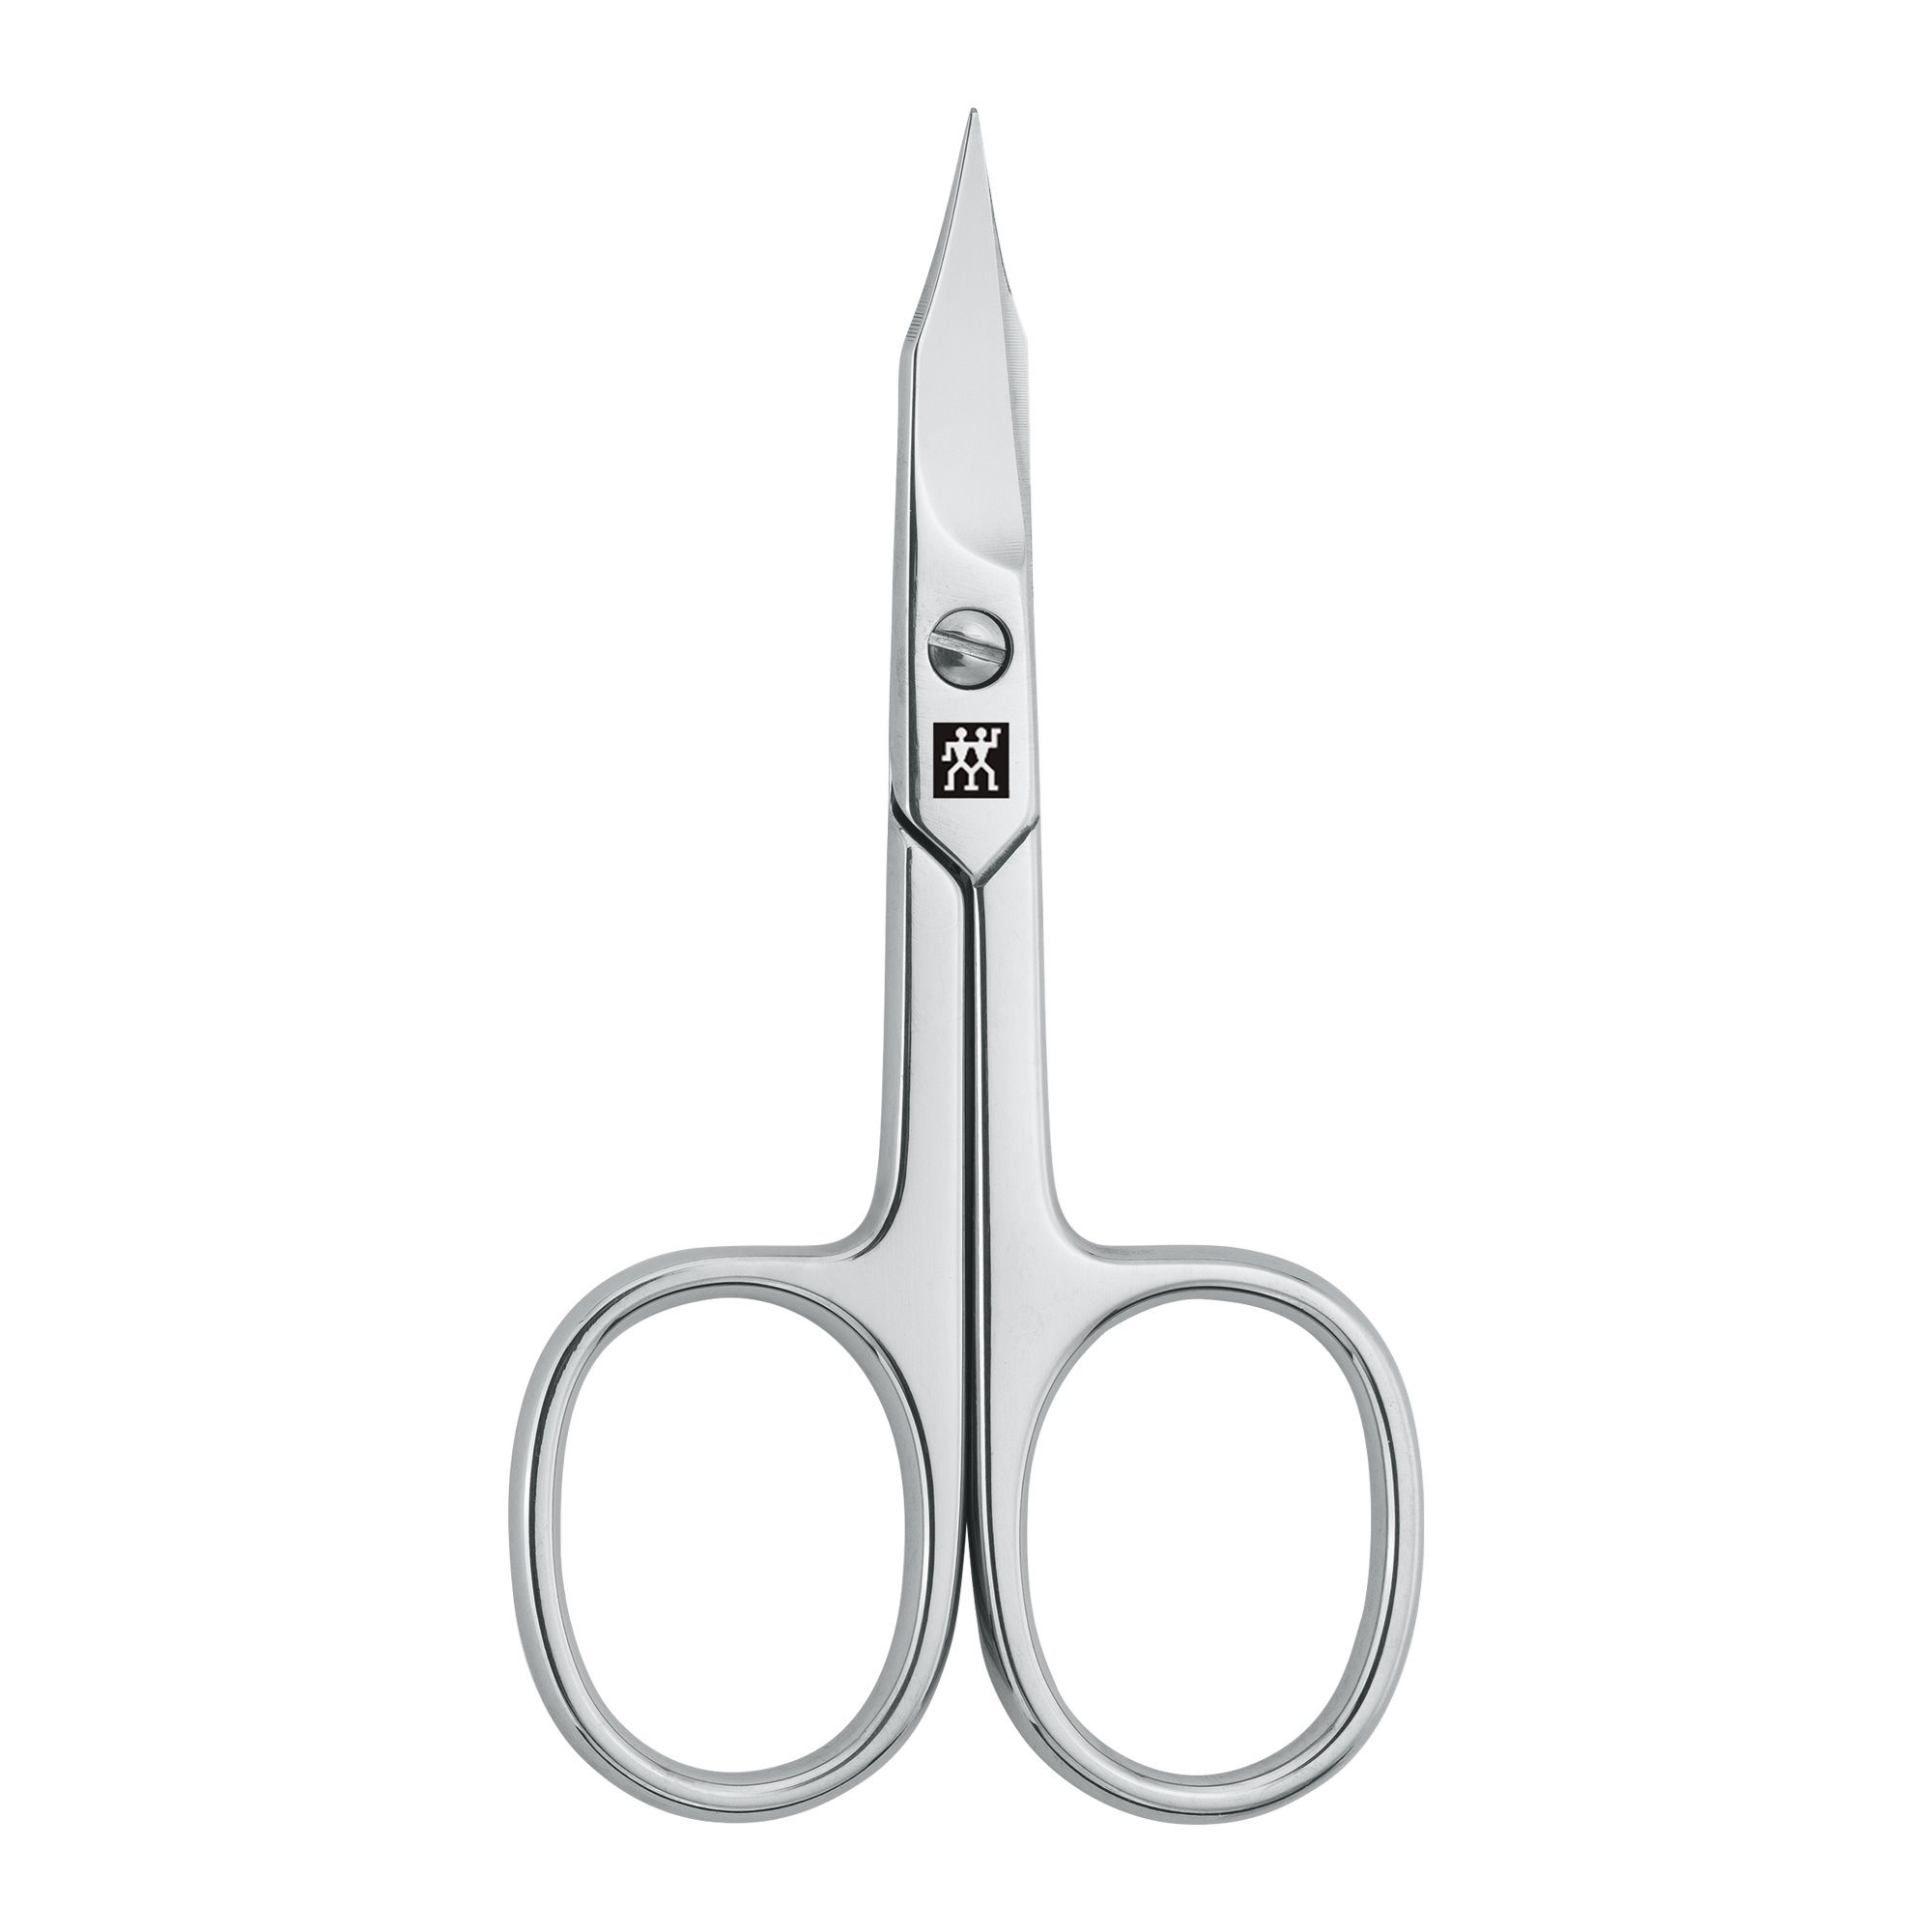 Nail and cuticle scissor, Classic | KitchenShop - Zwilling TWIN